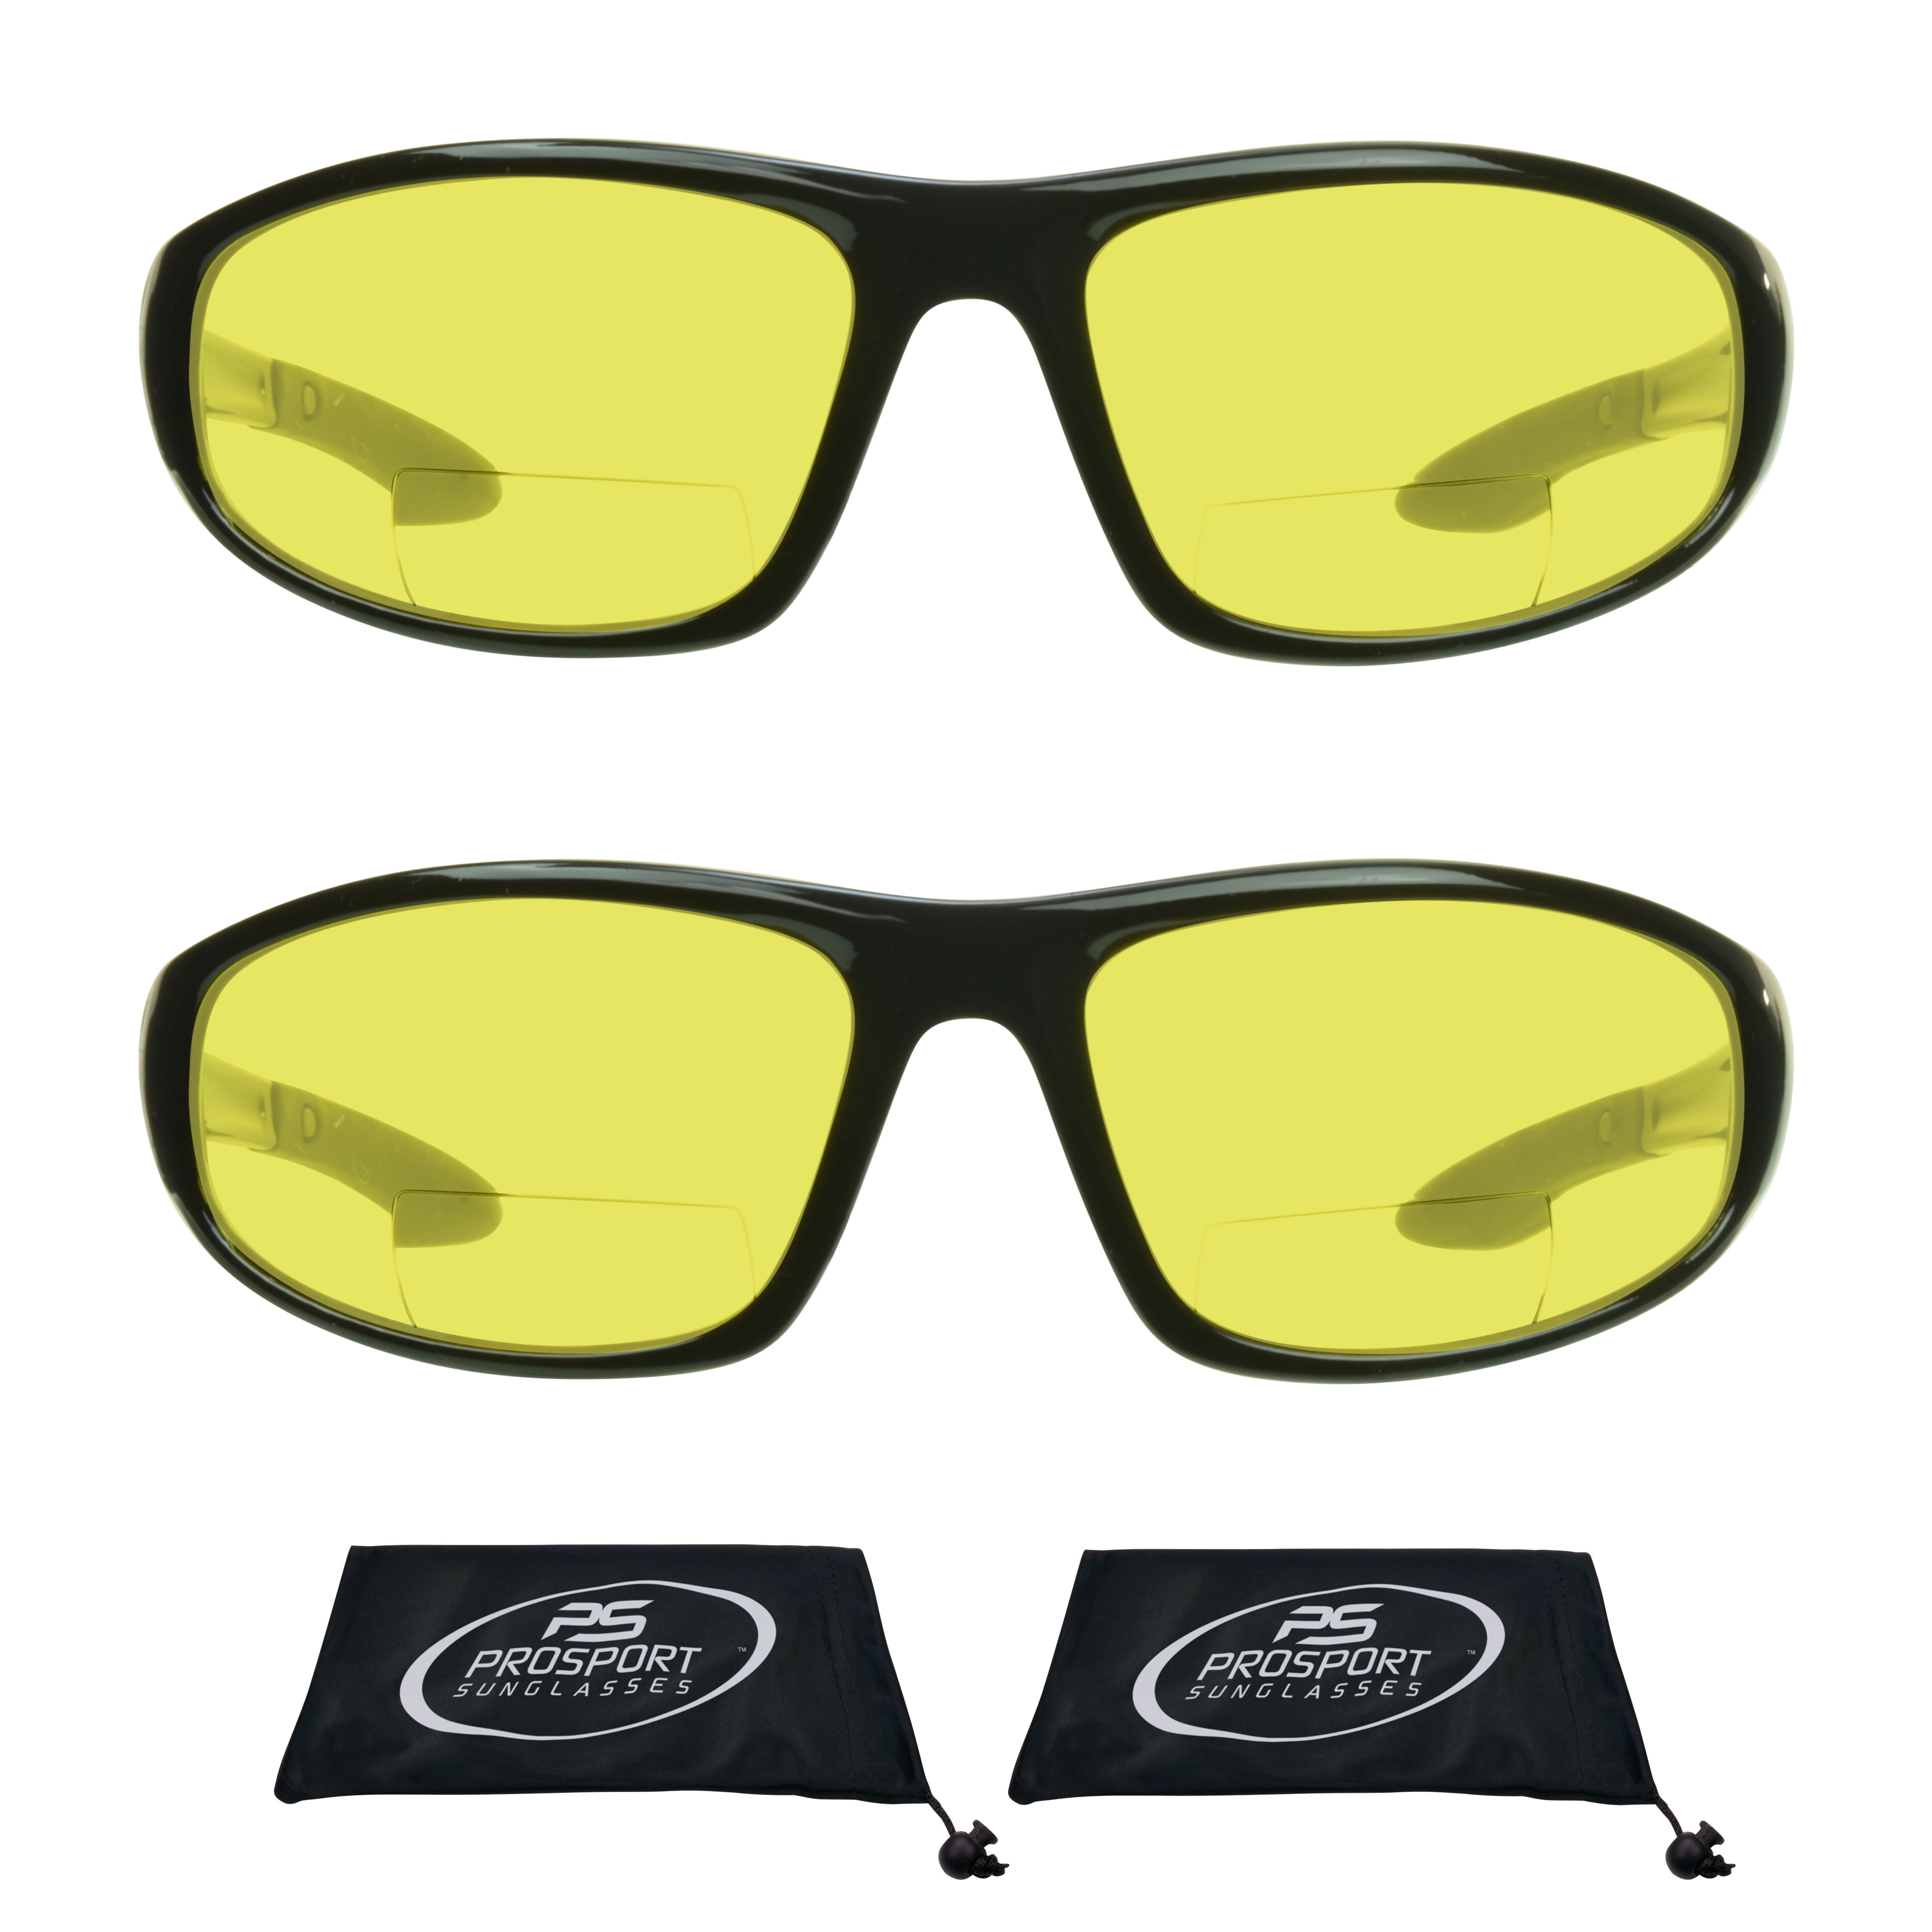 Bifocal Glasses Yellow Tint Night Vision Riding Driving Sports Indoor Unisex